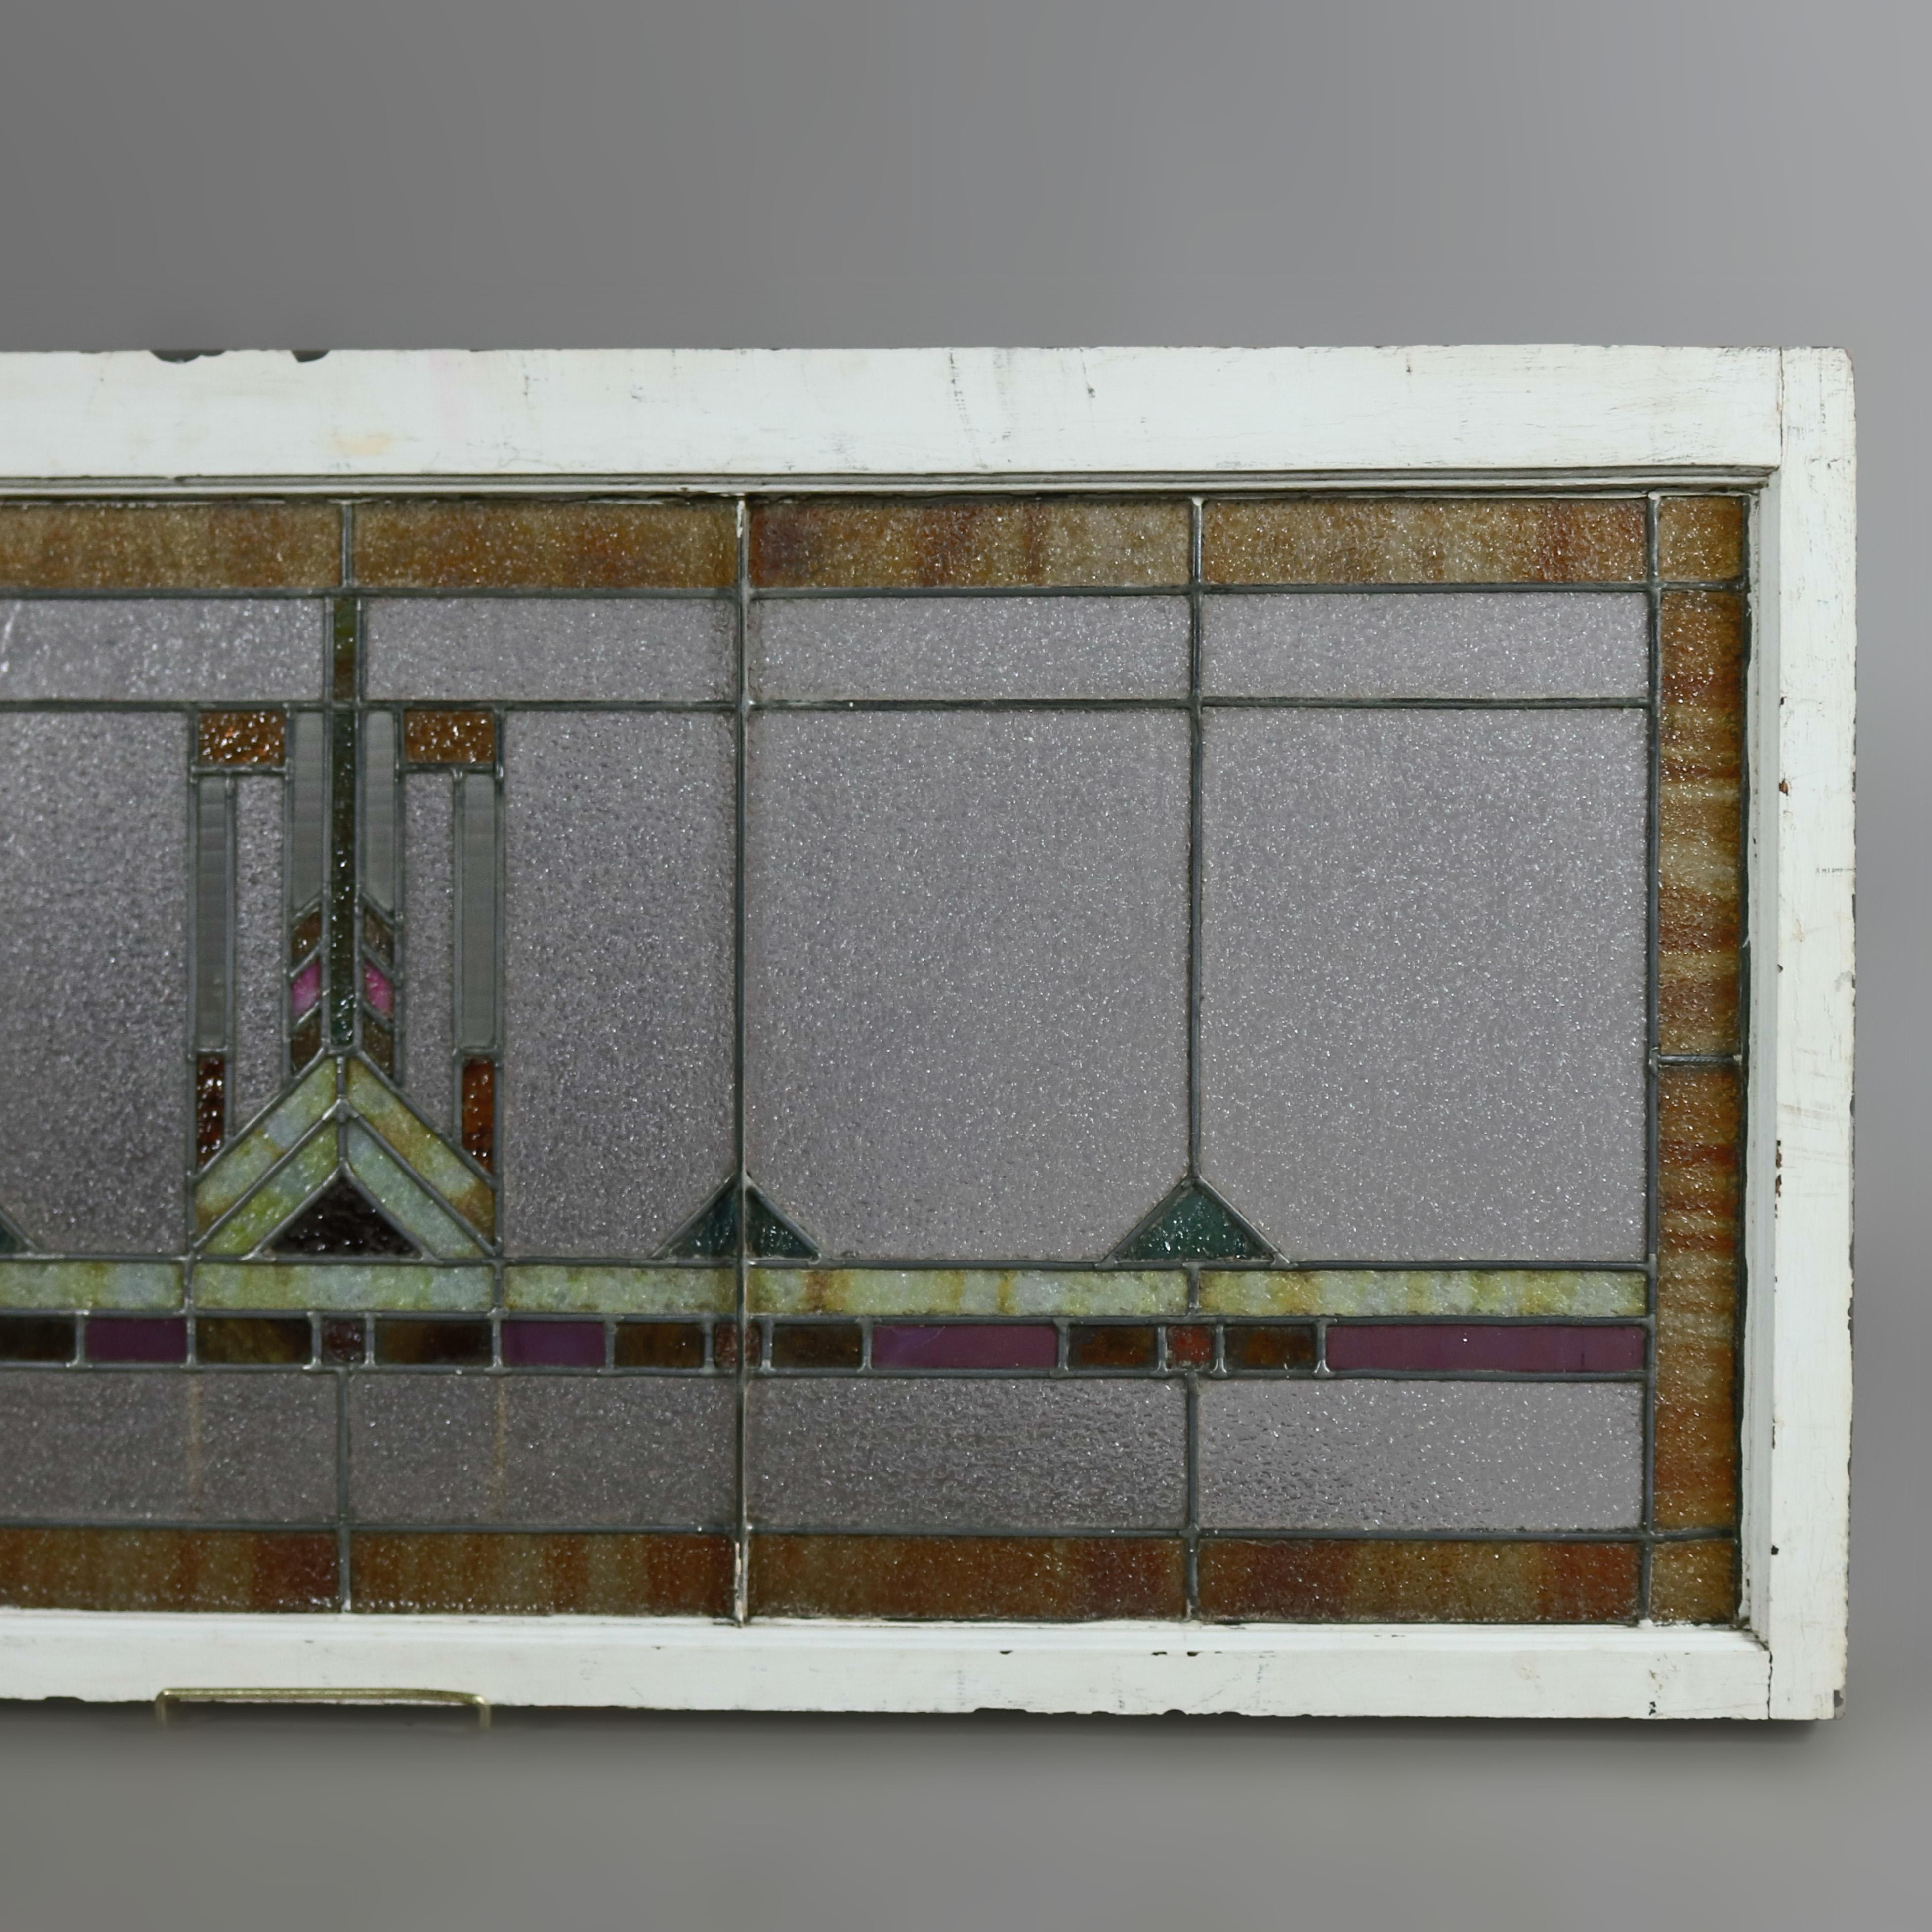 American Antique Arts & Crafts Frank Lloyd Wright Style Leaded Stained Glass Window